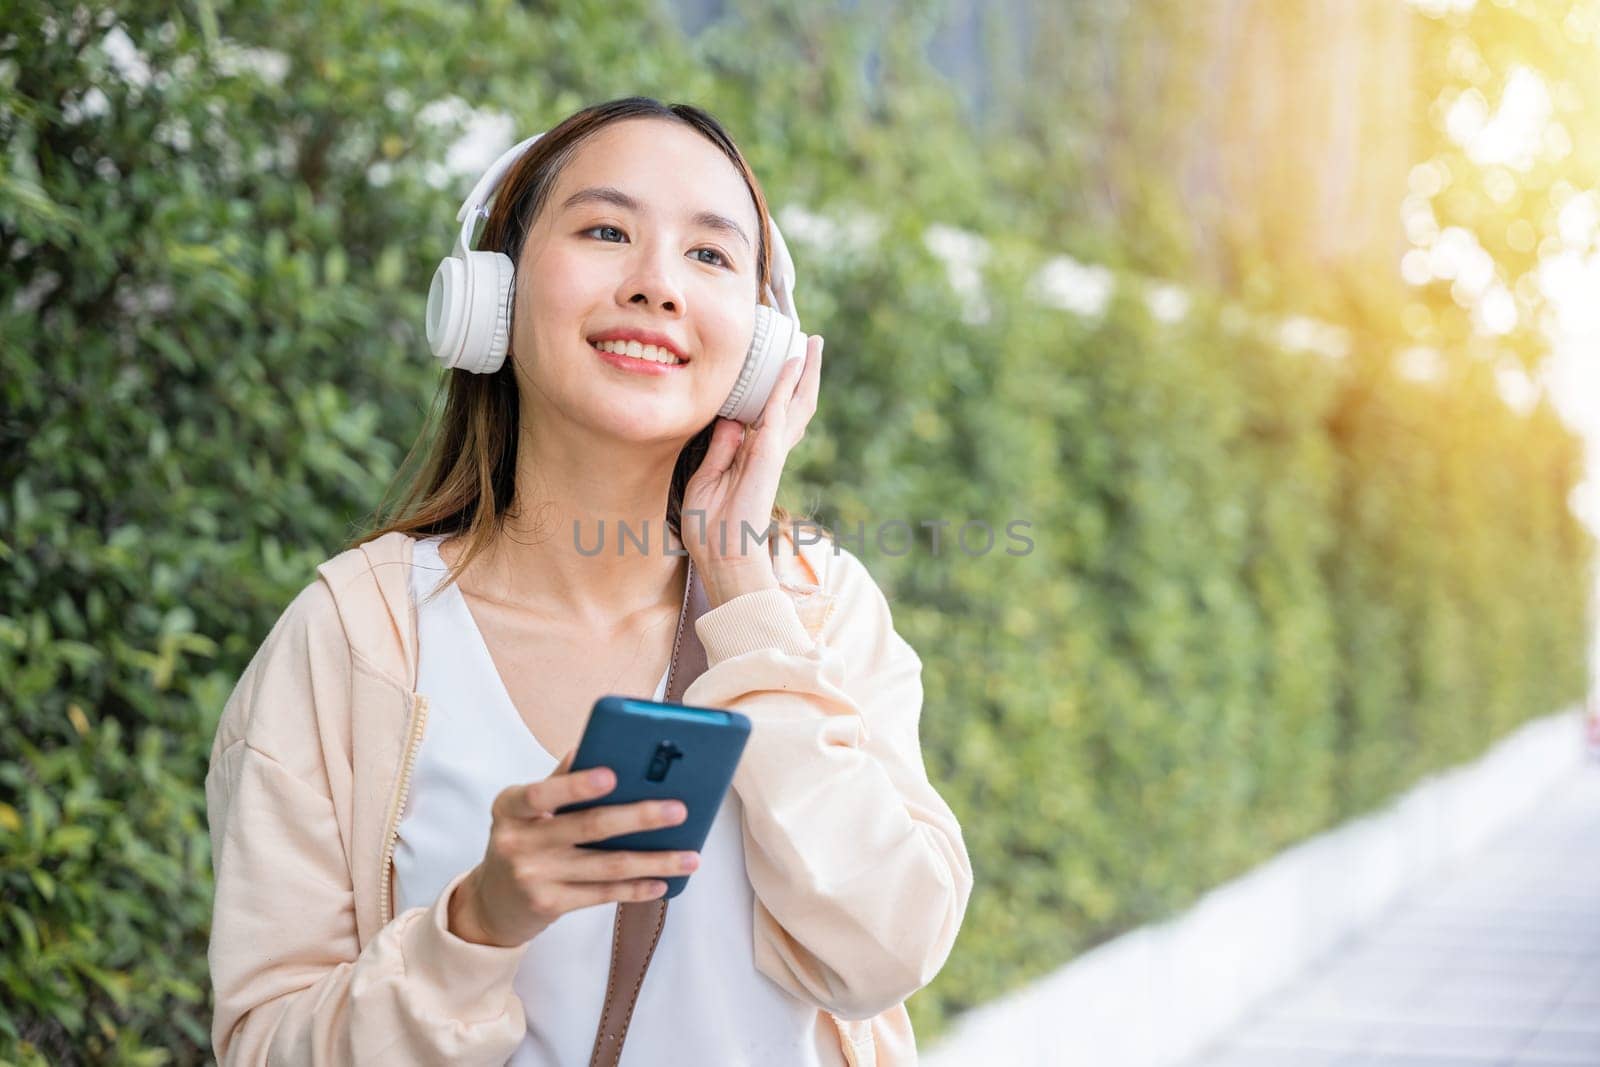 In midst of an urban city garden a happy young woman uses wireless headphones to choose and enjoy her favorite music dancing with pure joy. Her carefree spirit is a beautiful reflection of season. by Sorapop